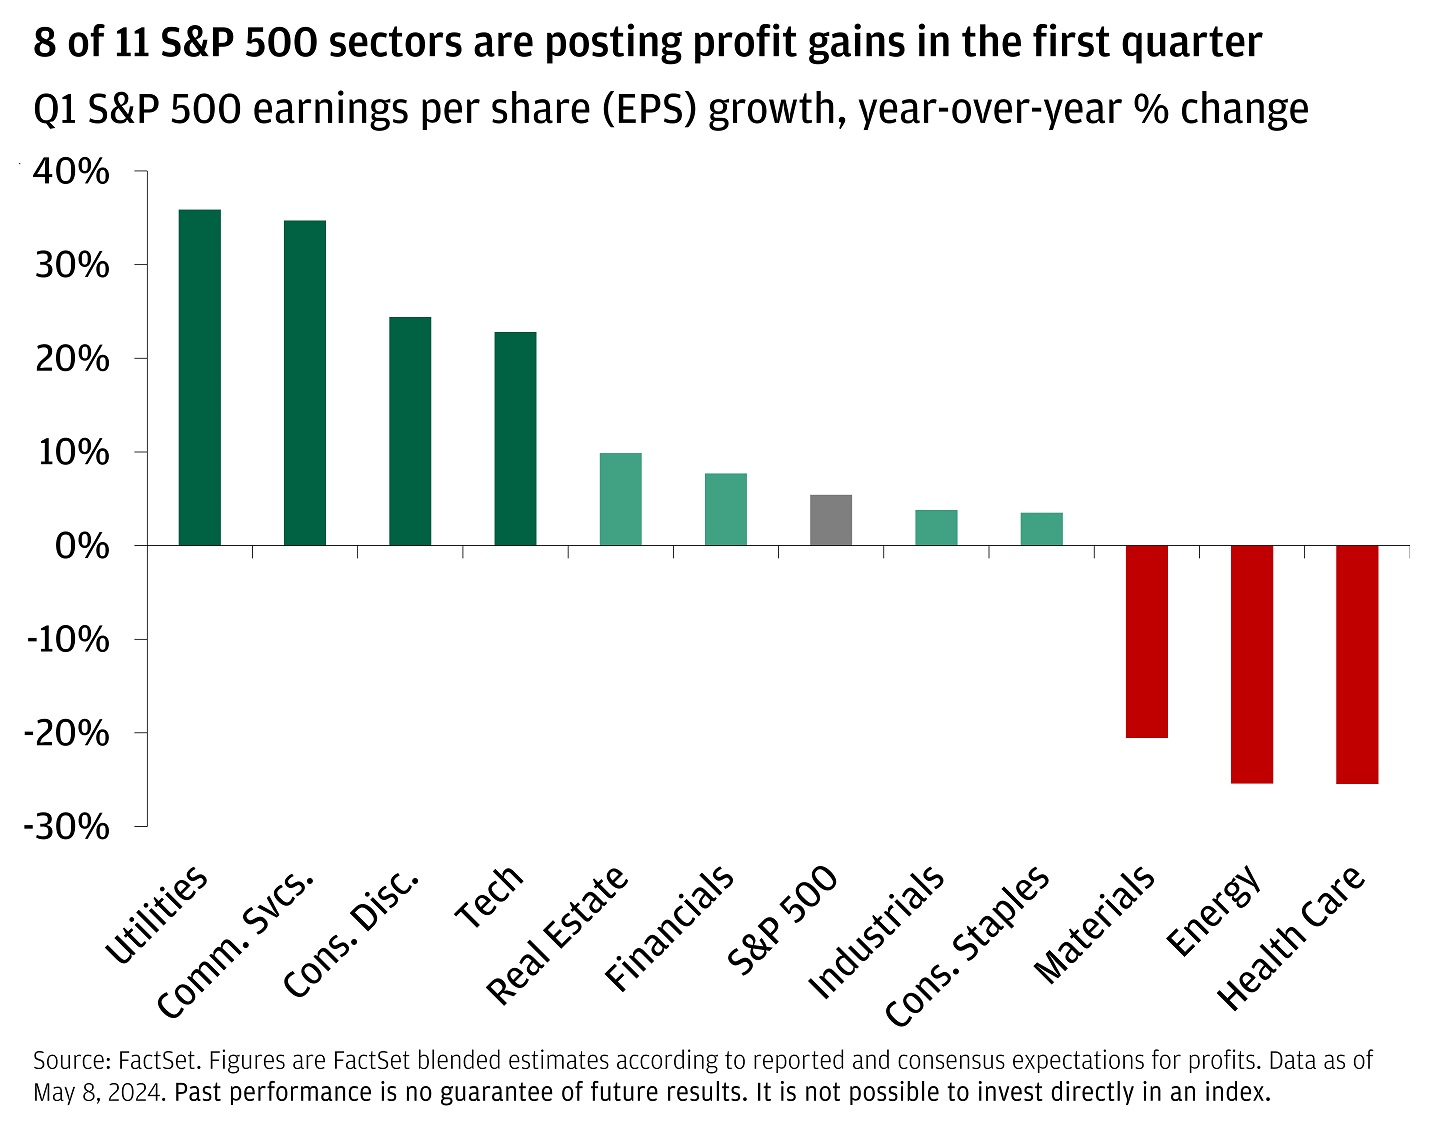 This chart shows Q1 S&P 500 earnings per share (EPS) growth, measured as the year-over-year percentage change, across sectors. It is shown in descending order.